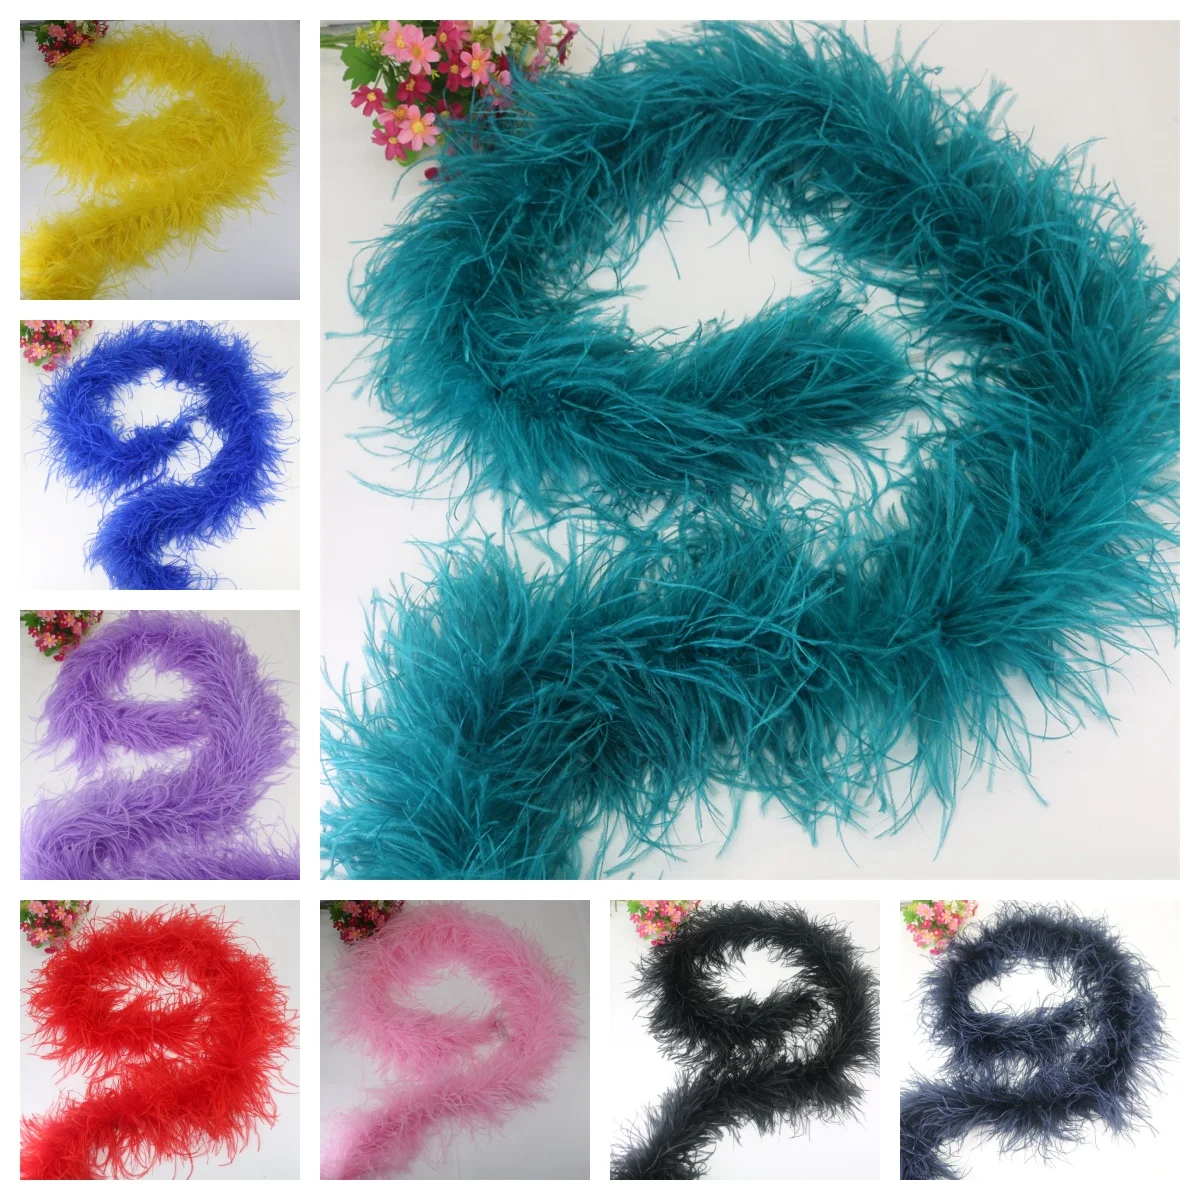 

6 Layer Ostrich Feathers Boa Centerpieces for Weddings Plumas De Faisan 2 Meters Wedding Party Accessories Plume Carnival Big